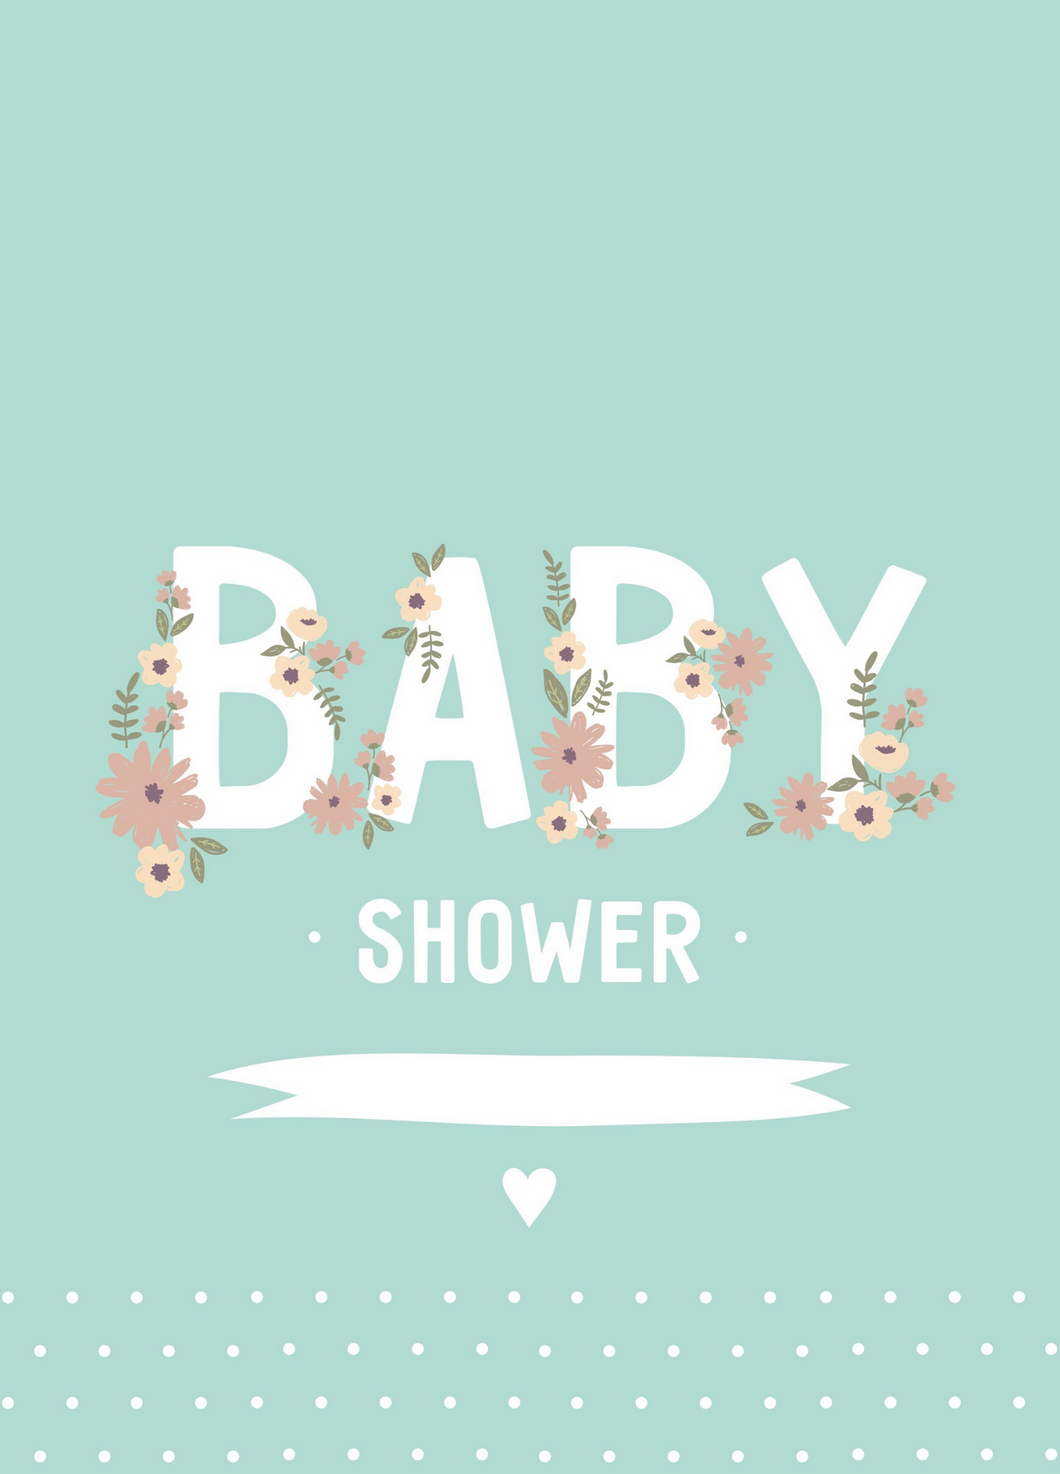 Baby Shower Recordable Audio Voice Greeting Card 